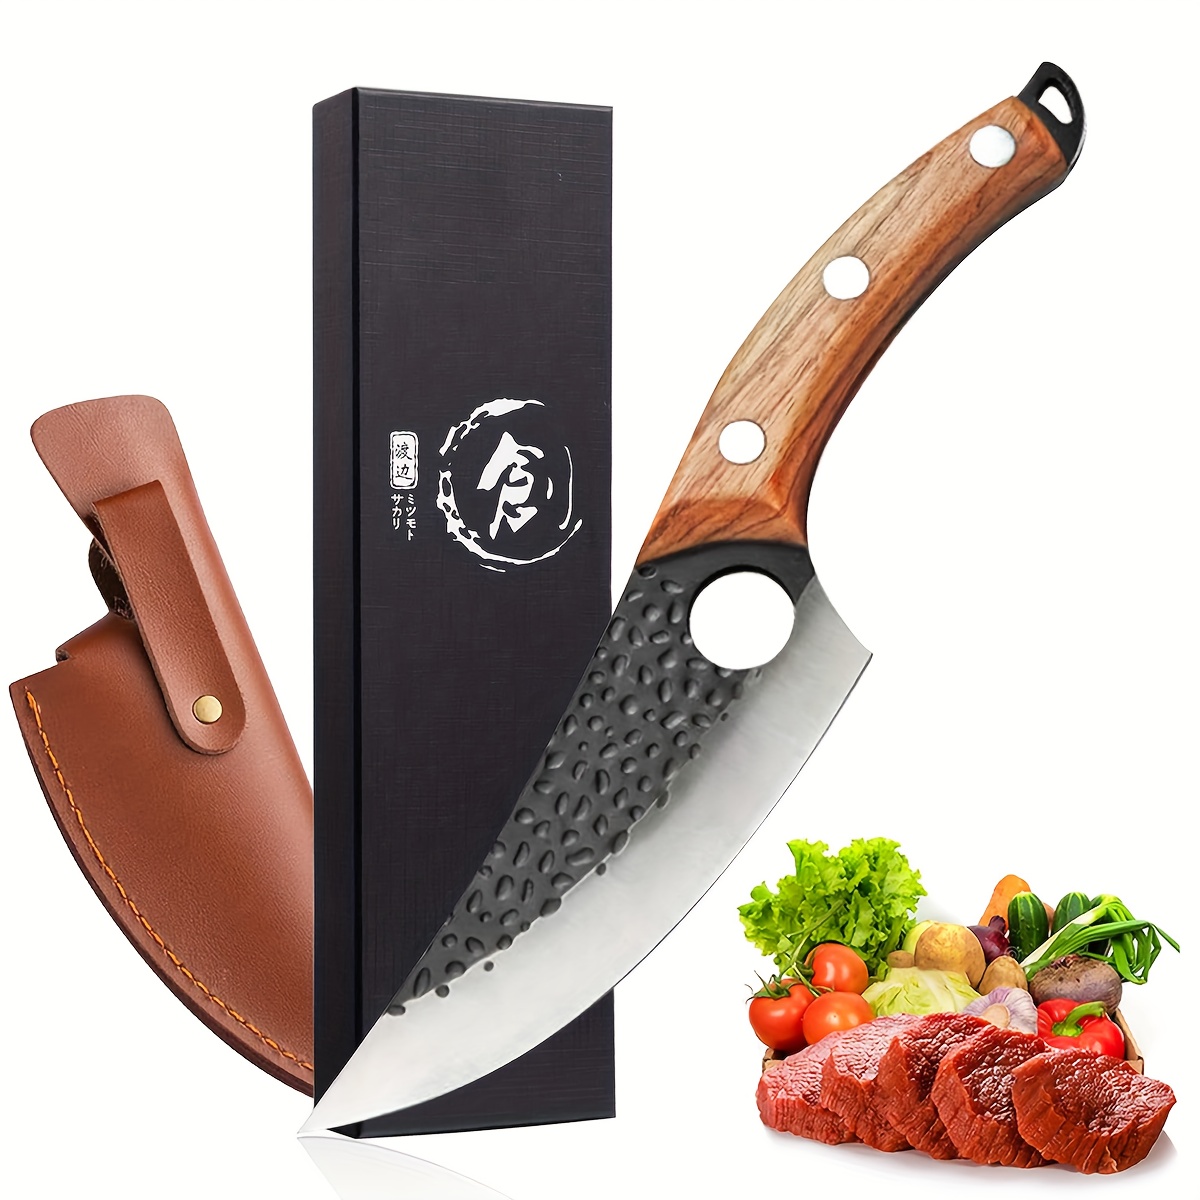 

Viking Knife Meat Cleaver Knife - Hand Forged Boning Knife With Sheath Butcher Knives High Carbon Steel Chef Knives For Kitchen, Camping, Bbq, Gift For Father's Day